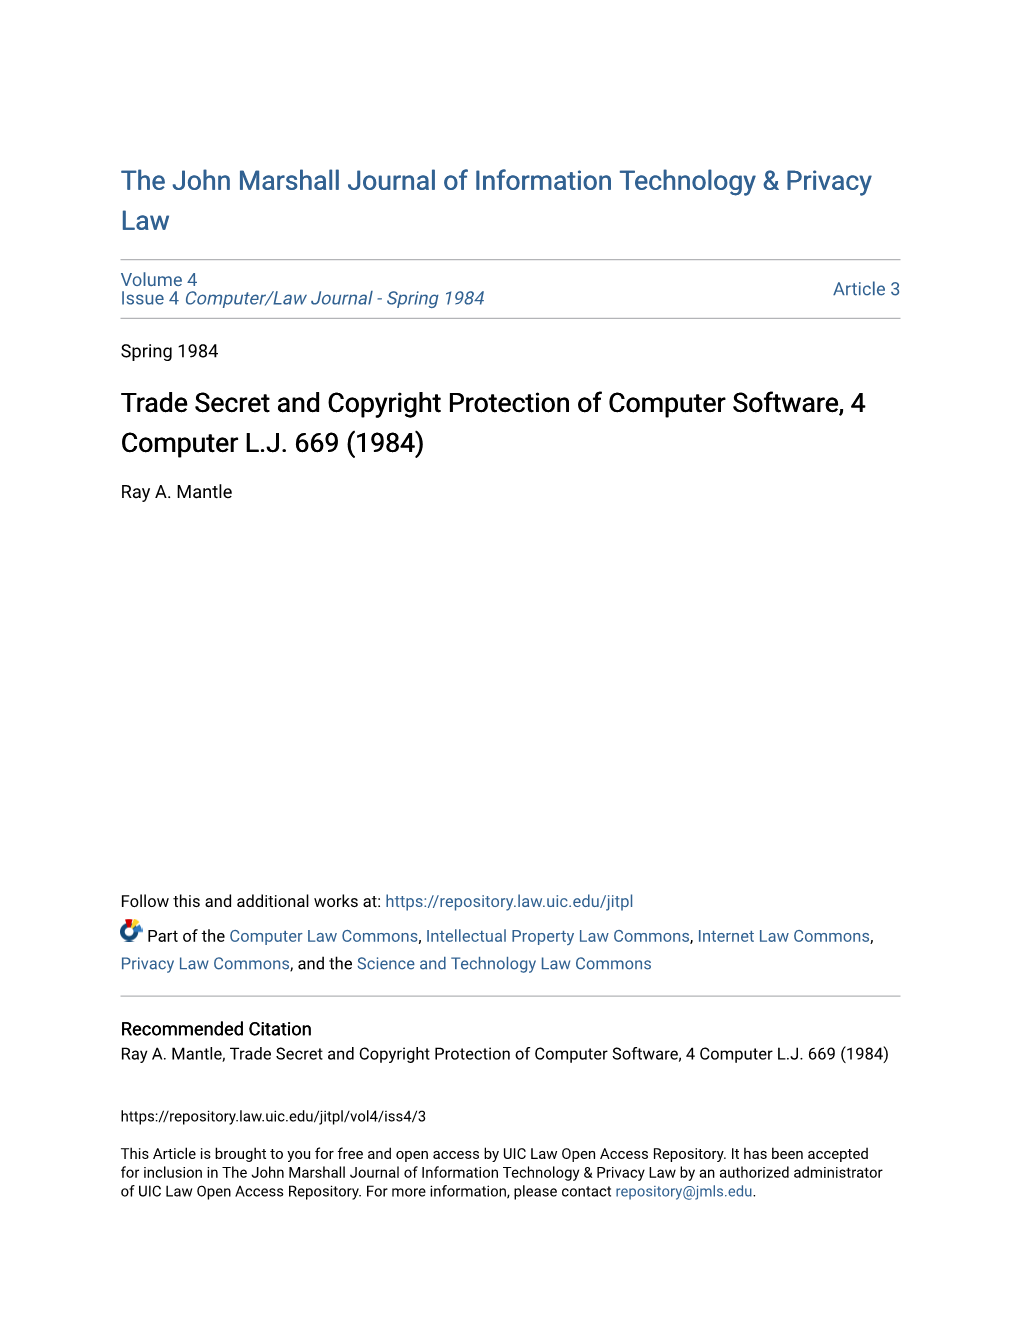 Trade Secret and Copyright Protection of Computer Software, 4 Computer L.J